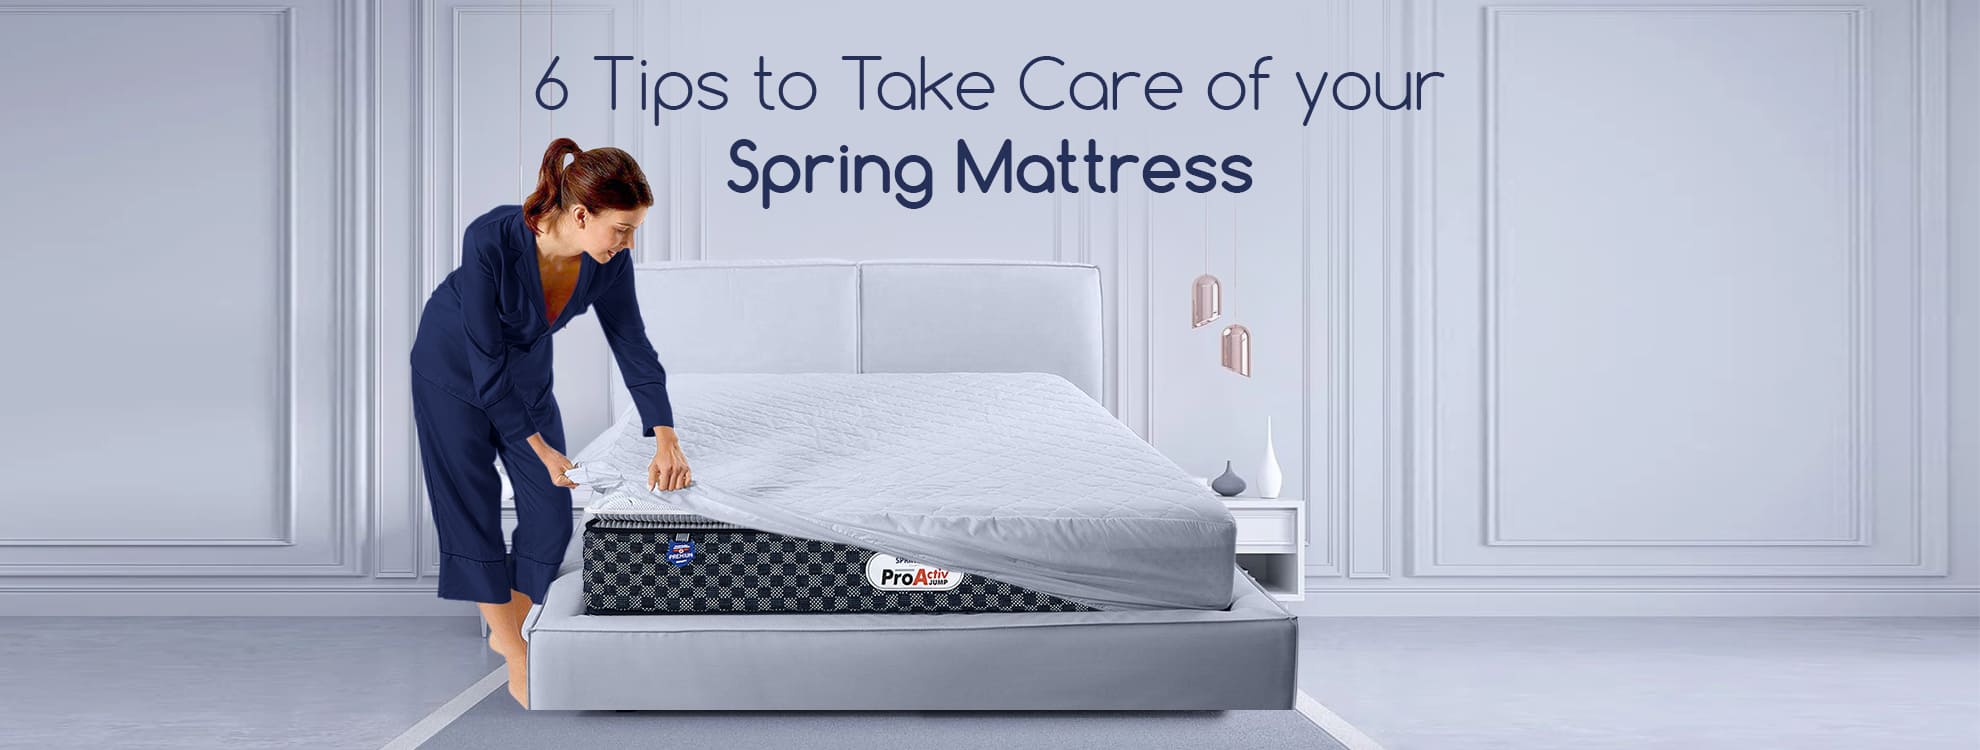 Take Care of Your Spring Mattress